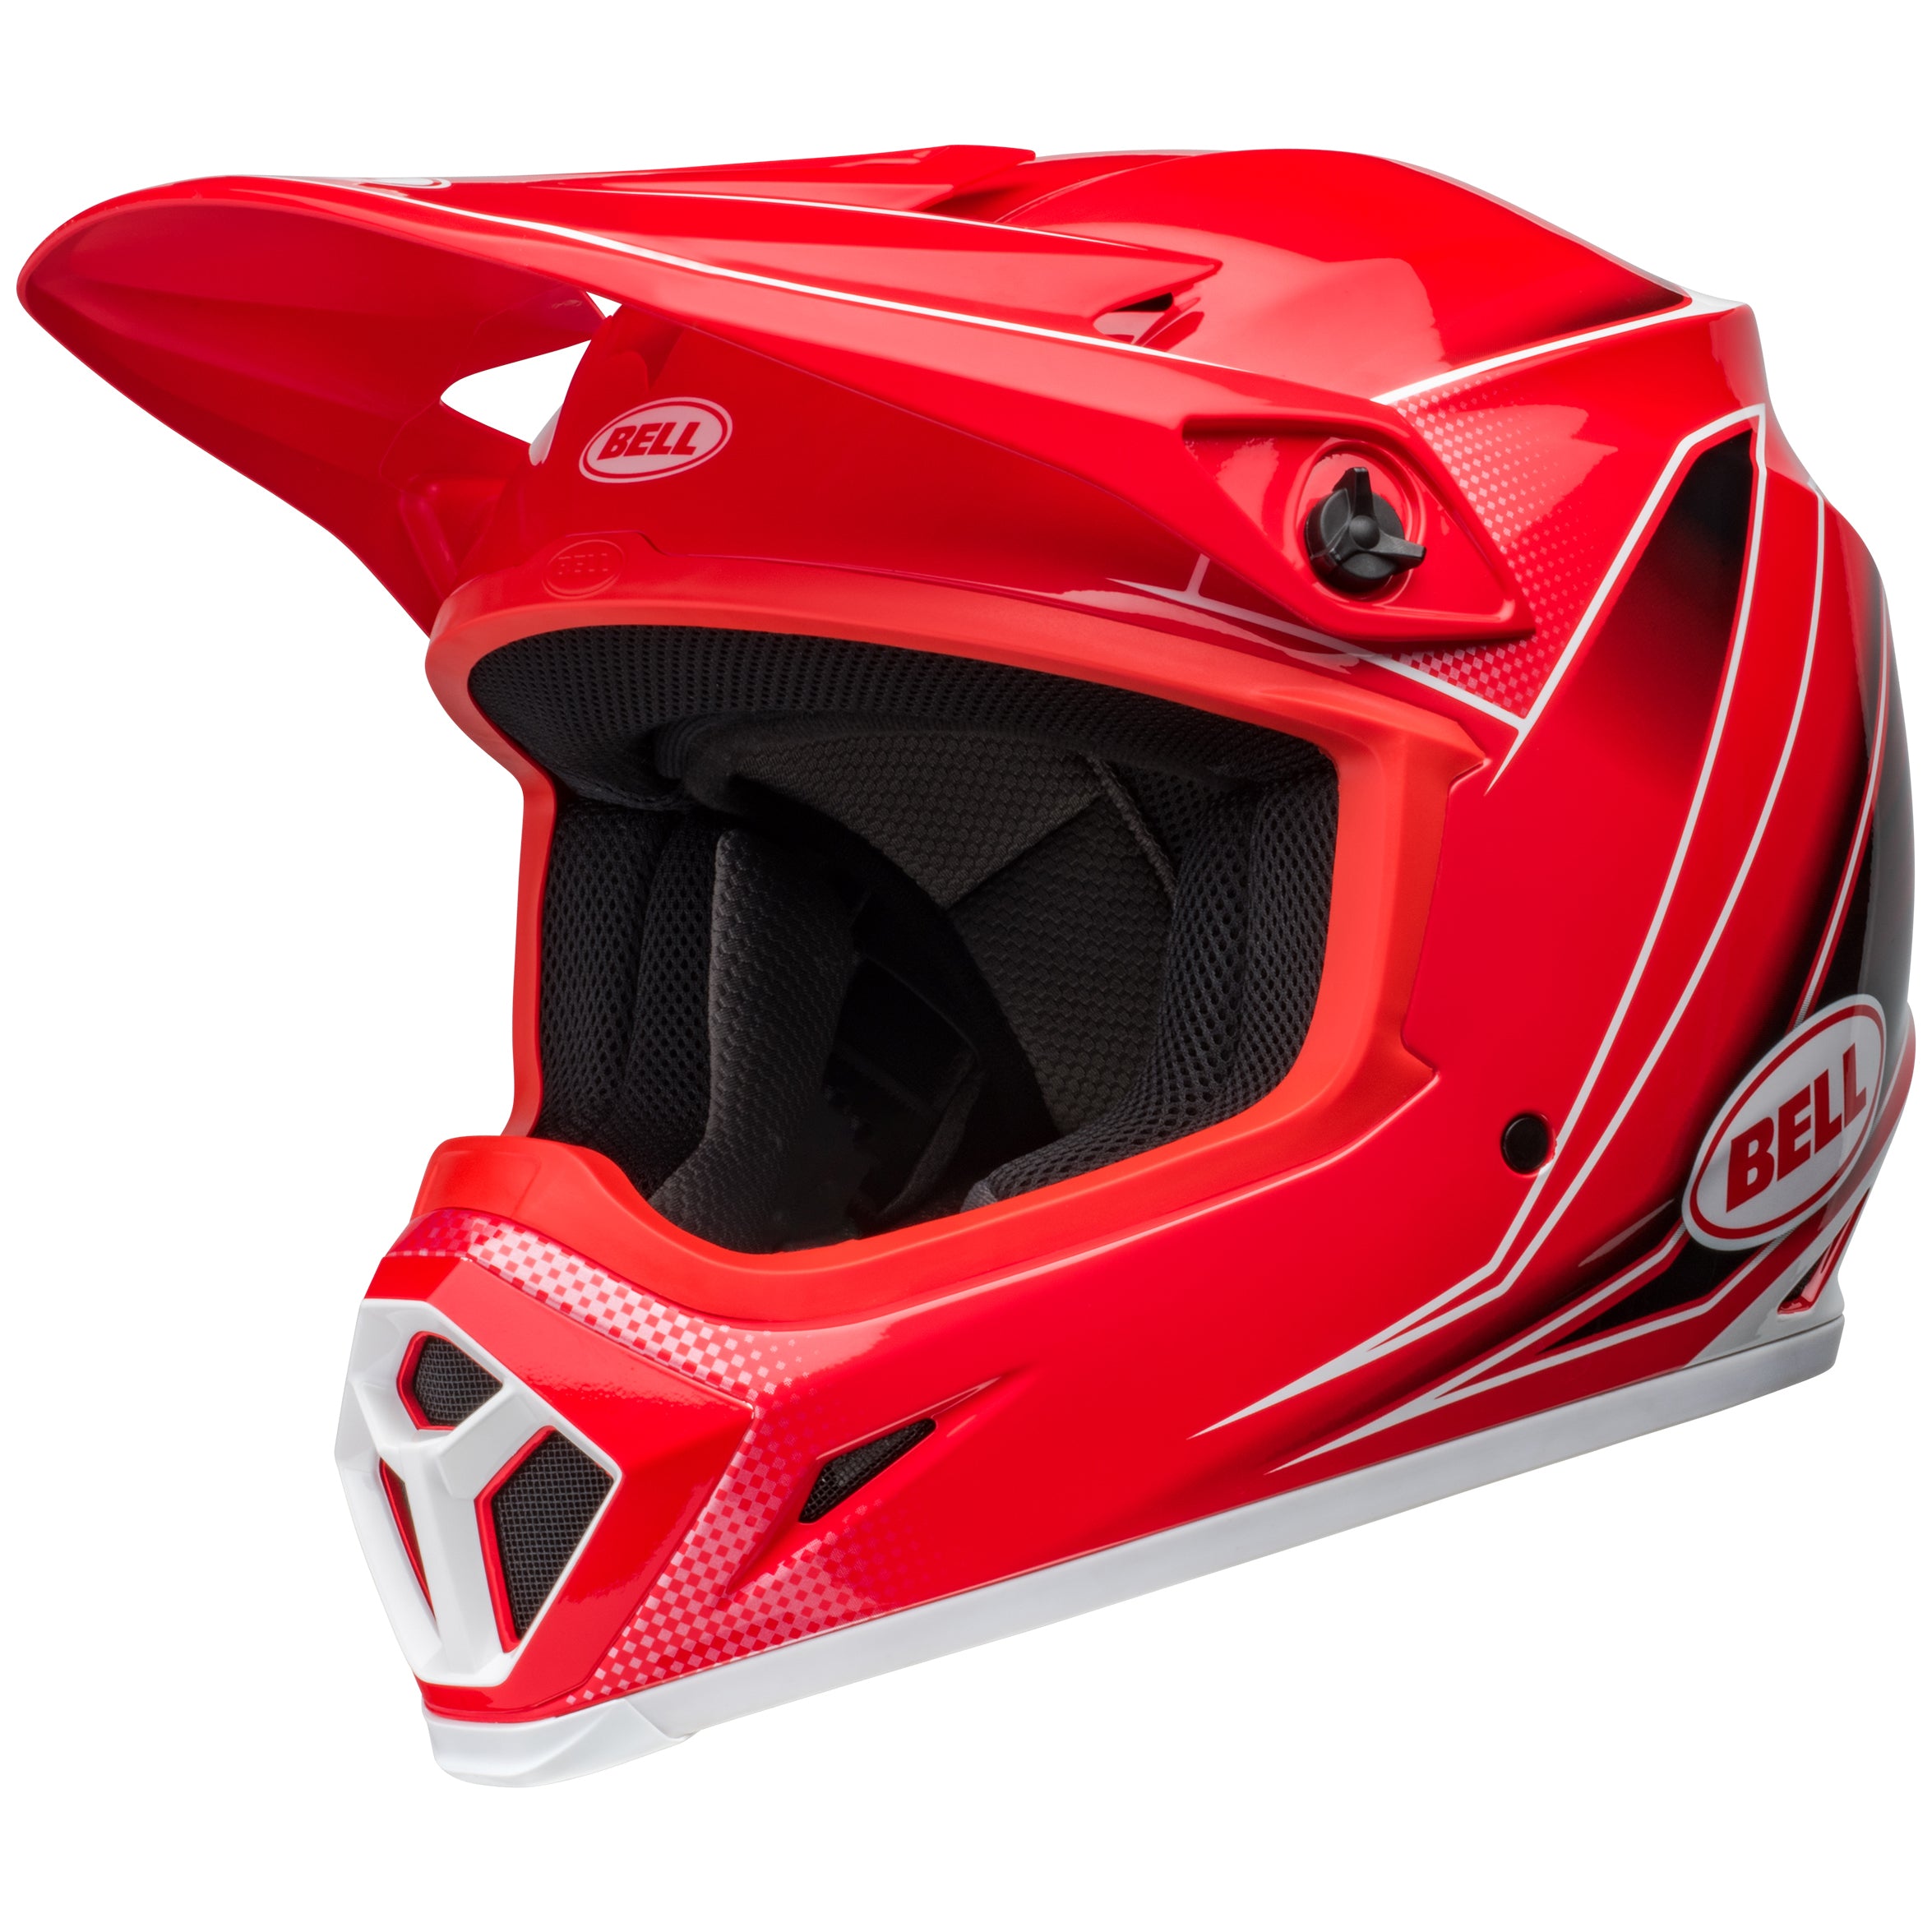 Bell MX 2024 MX-9 Mips Adult Helmet in Zone Red, featuring advanced safety with ECE6 certification